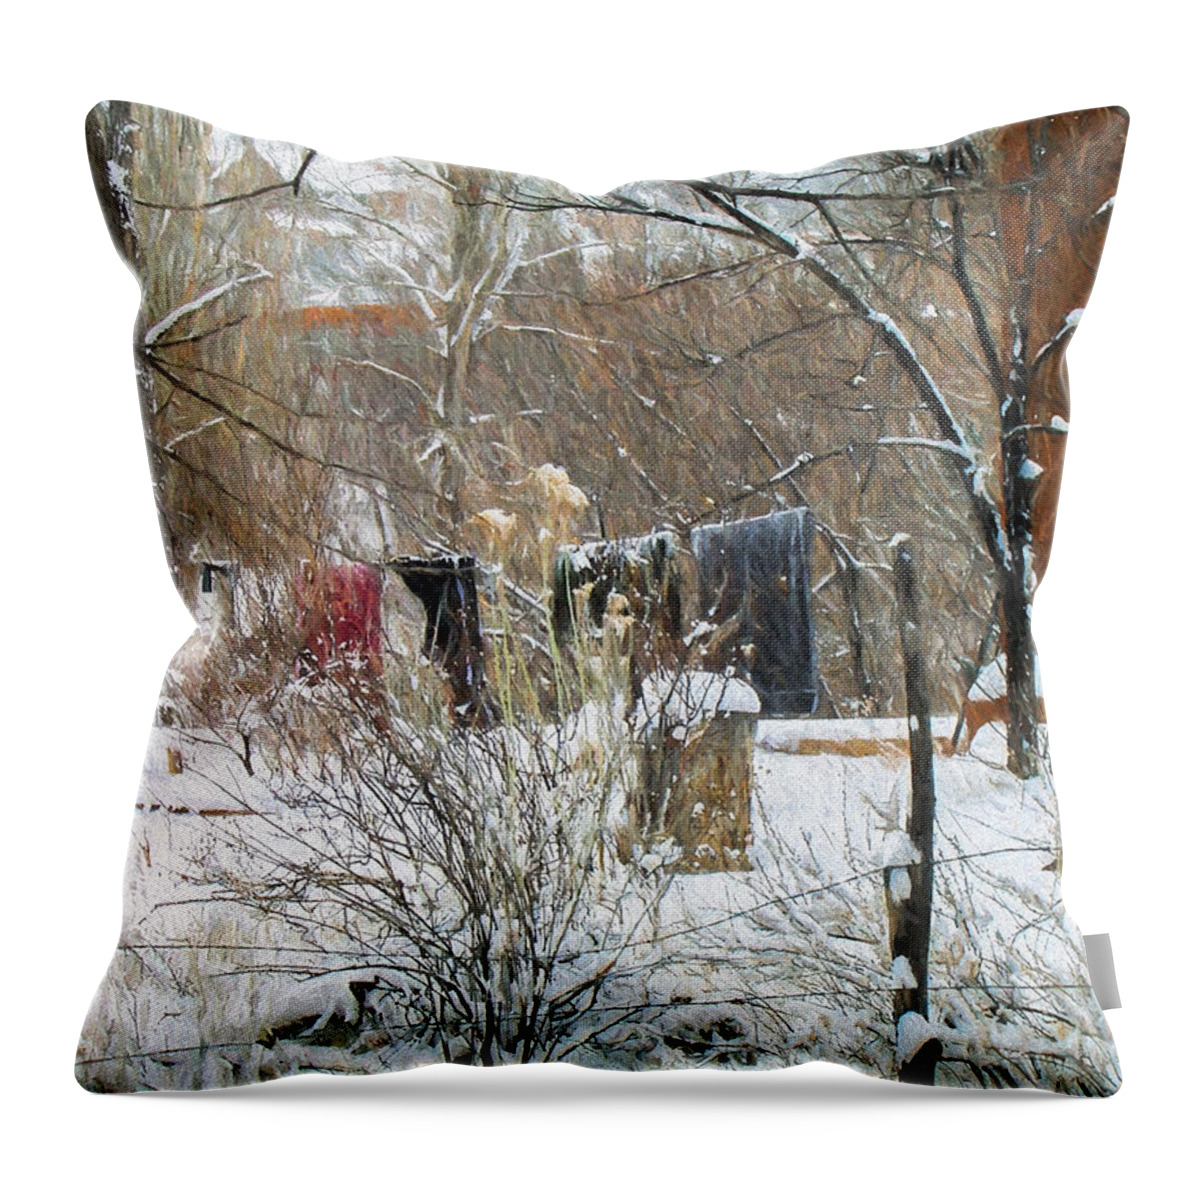 Frozen Throw Pillow featuring the photograph Frozen Laundry by Lou Novick